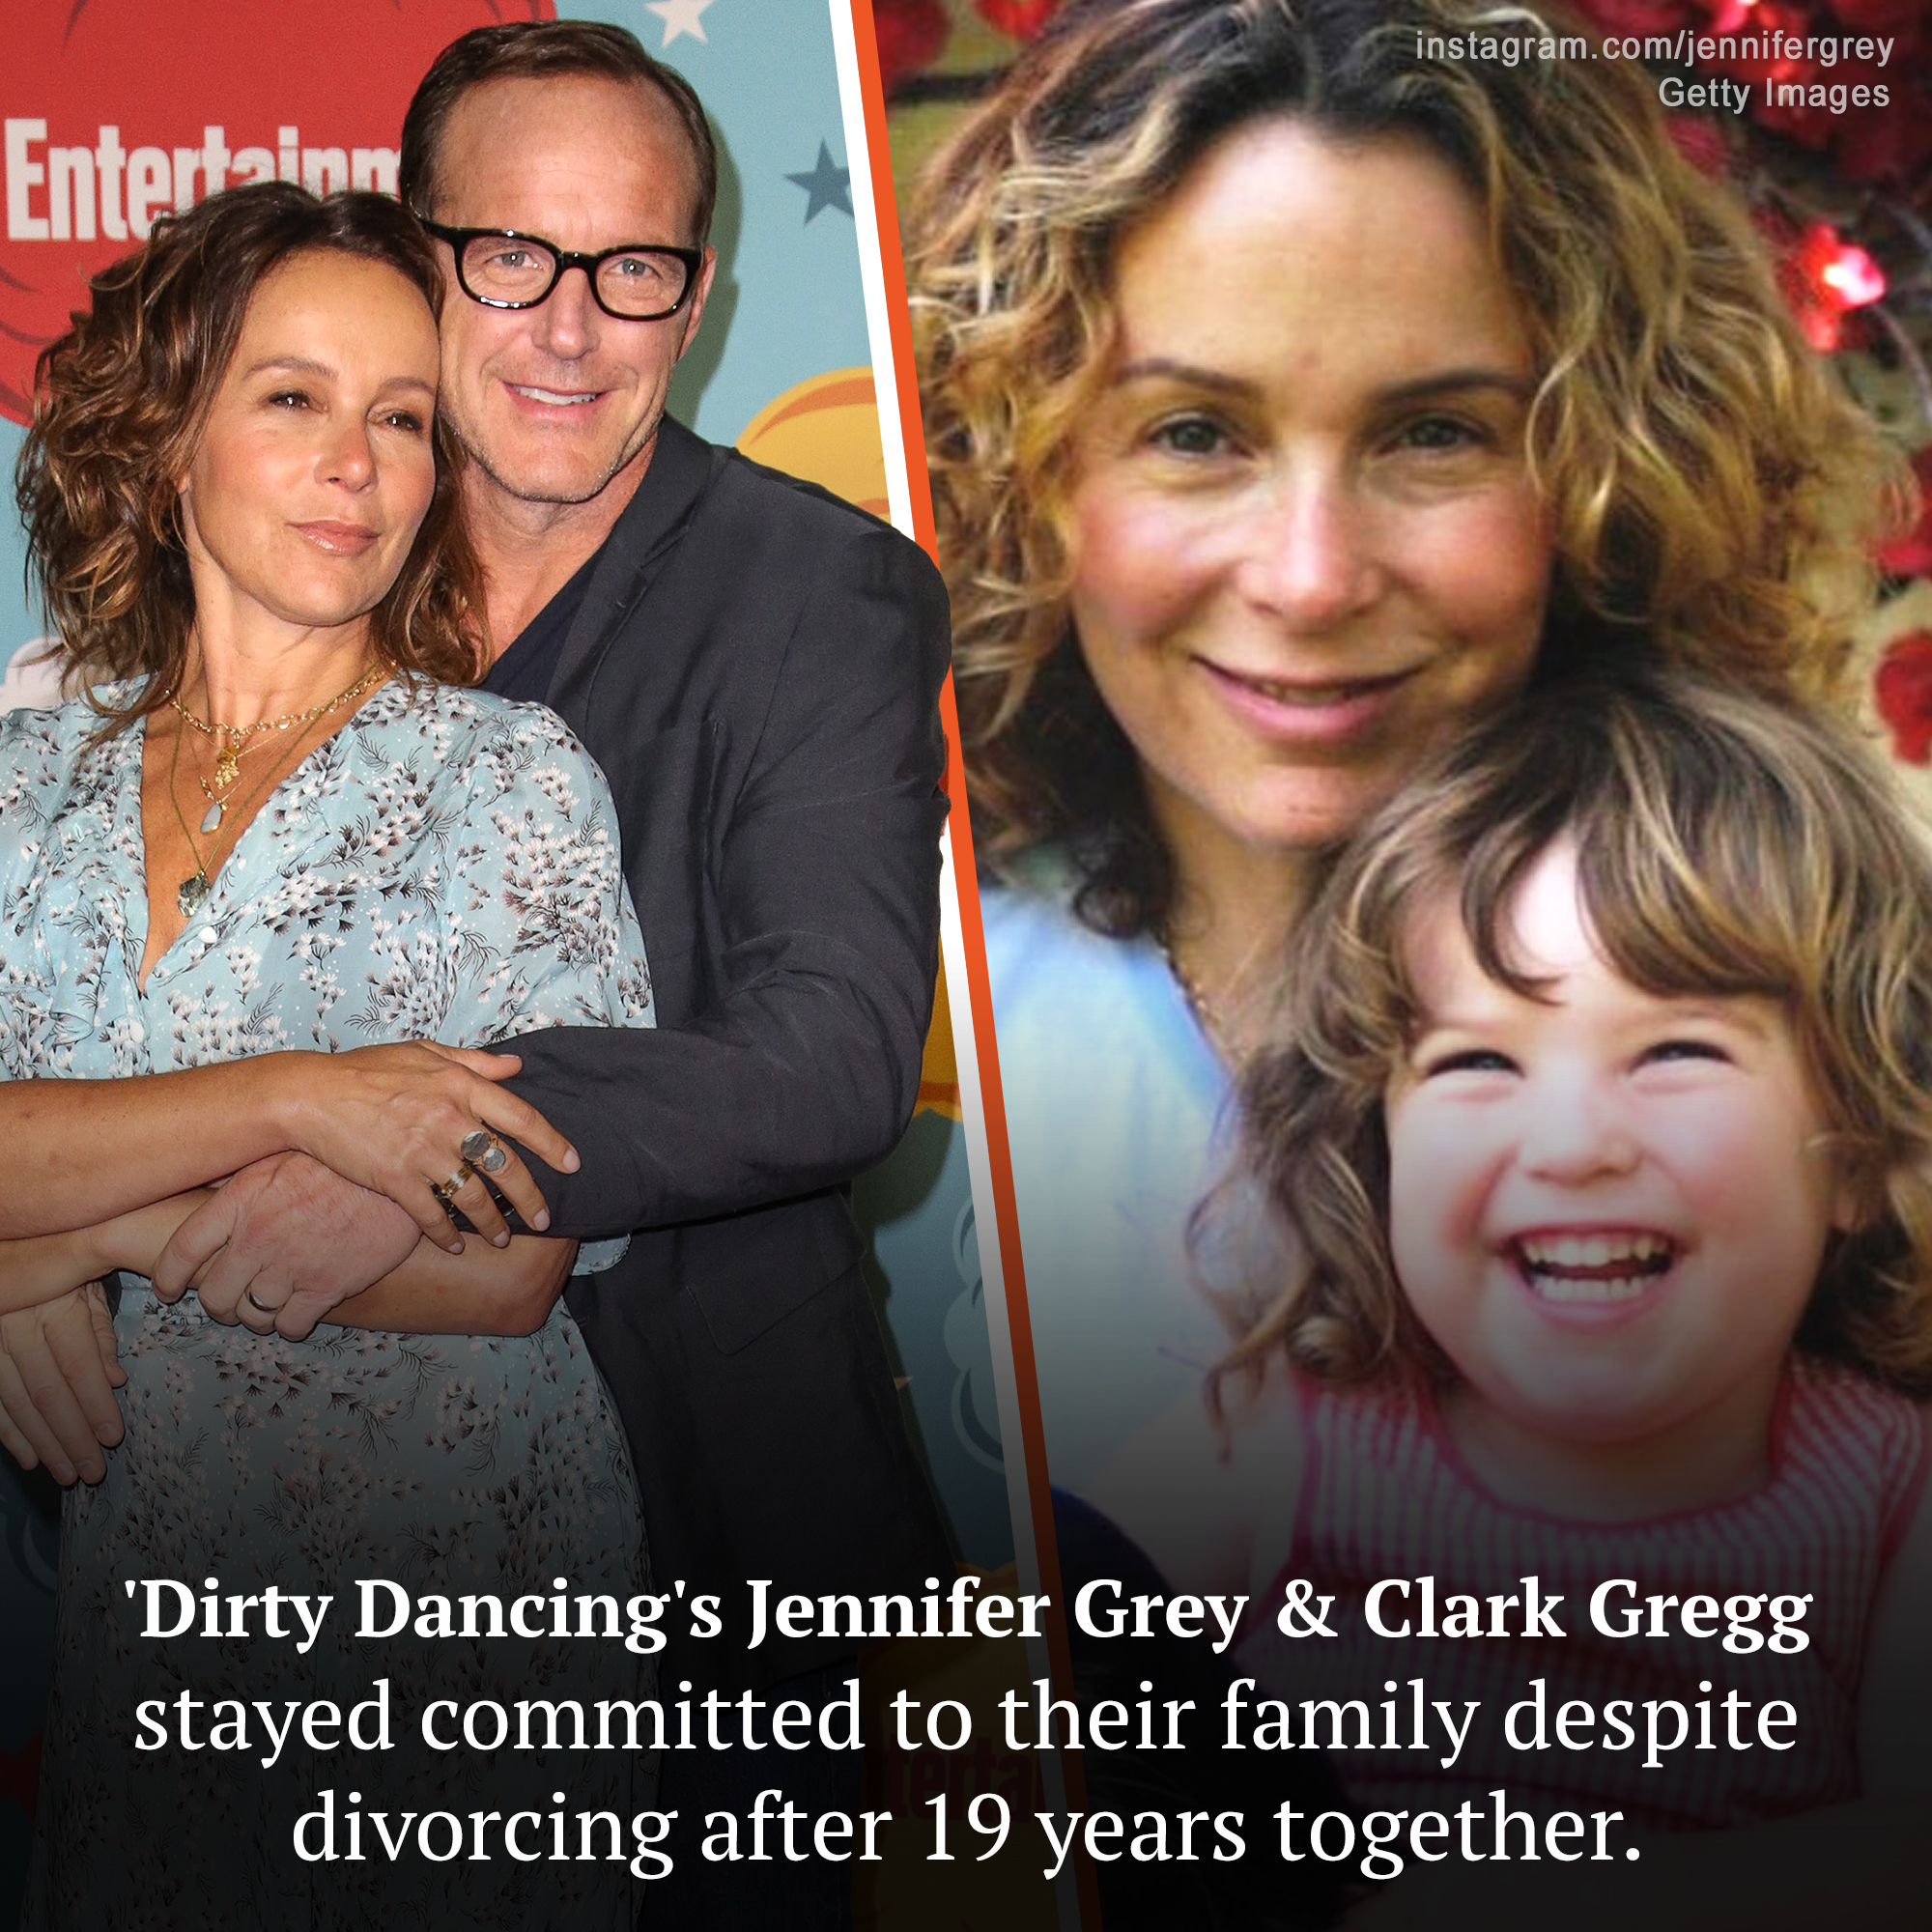 Jennifer Grey Was Married to Clark Gregg for 19 Years and Share a Child — She Cried When They Separated